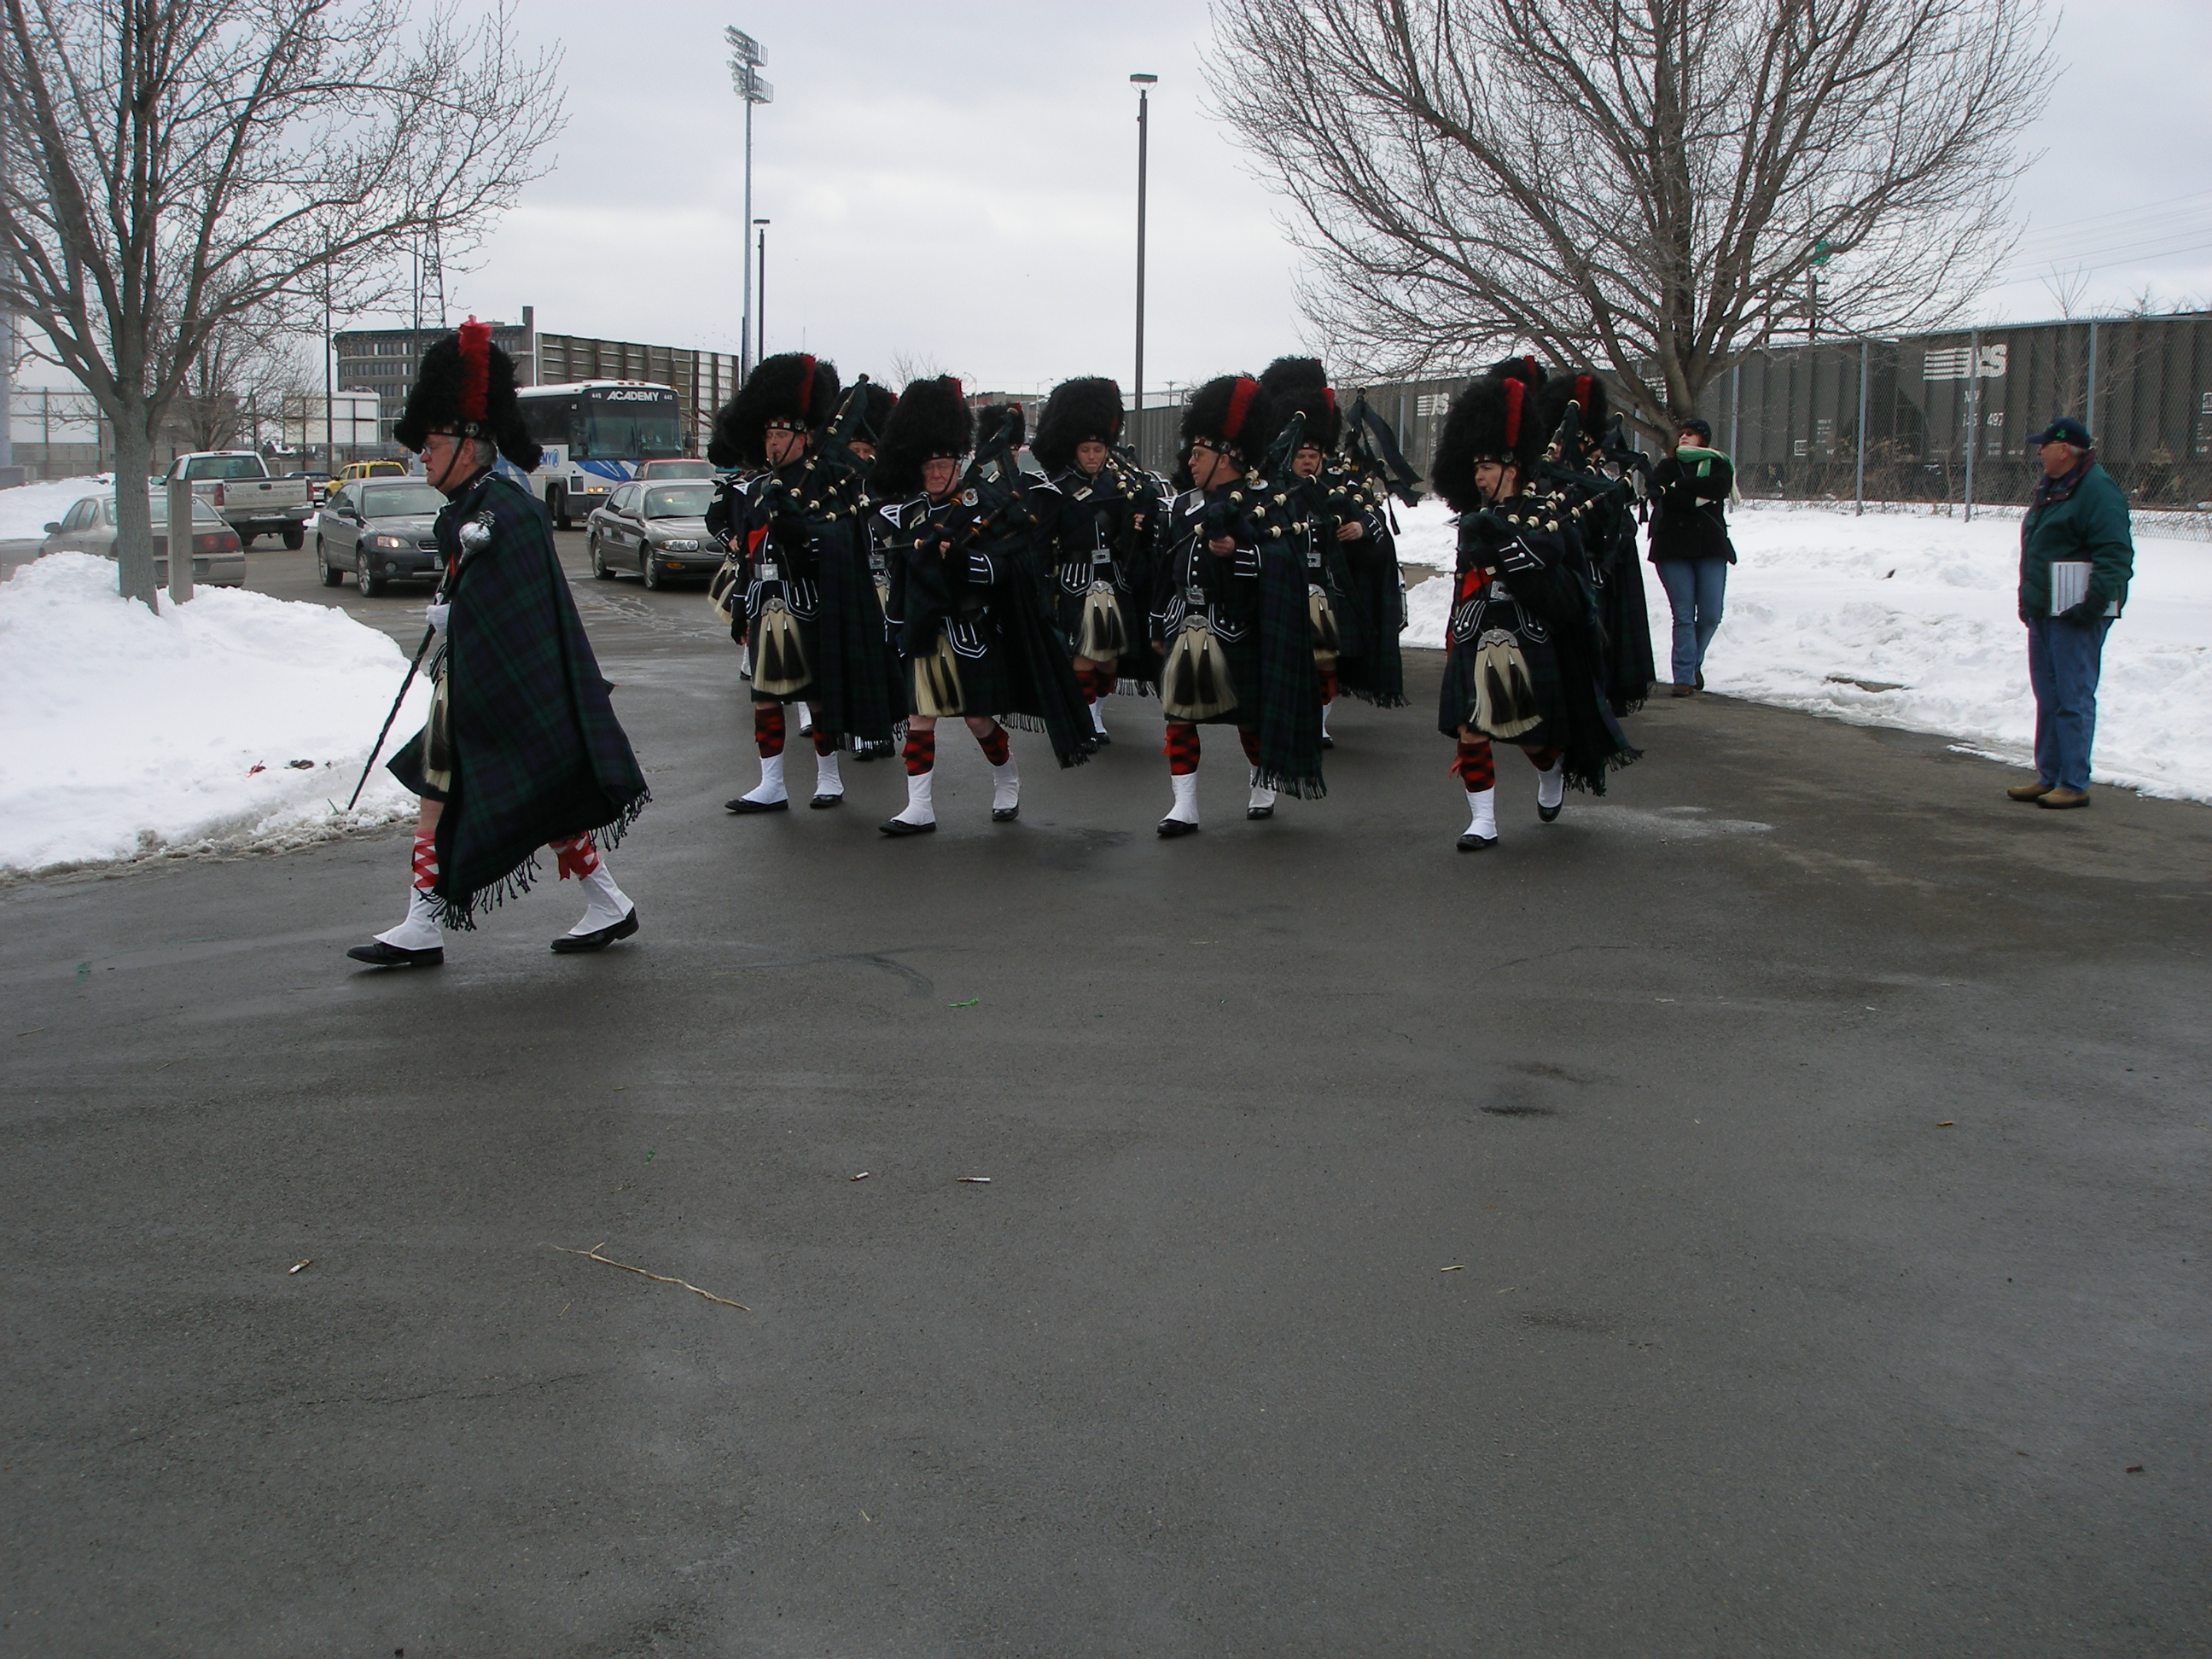 03-04-06  Other - St. Patrick's Day Parade